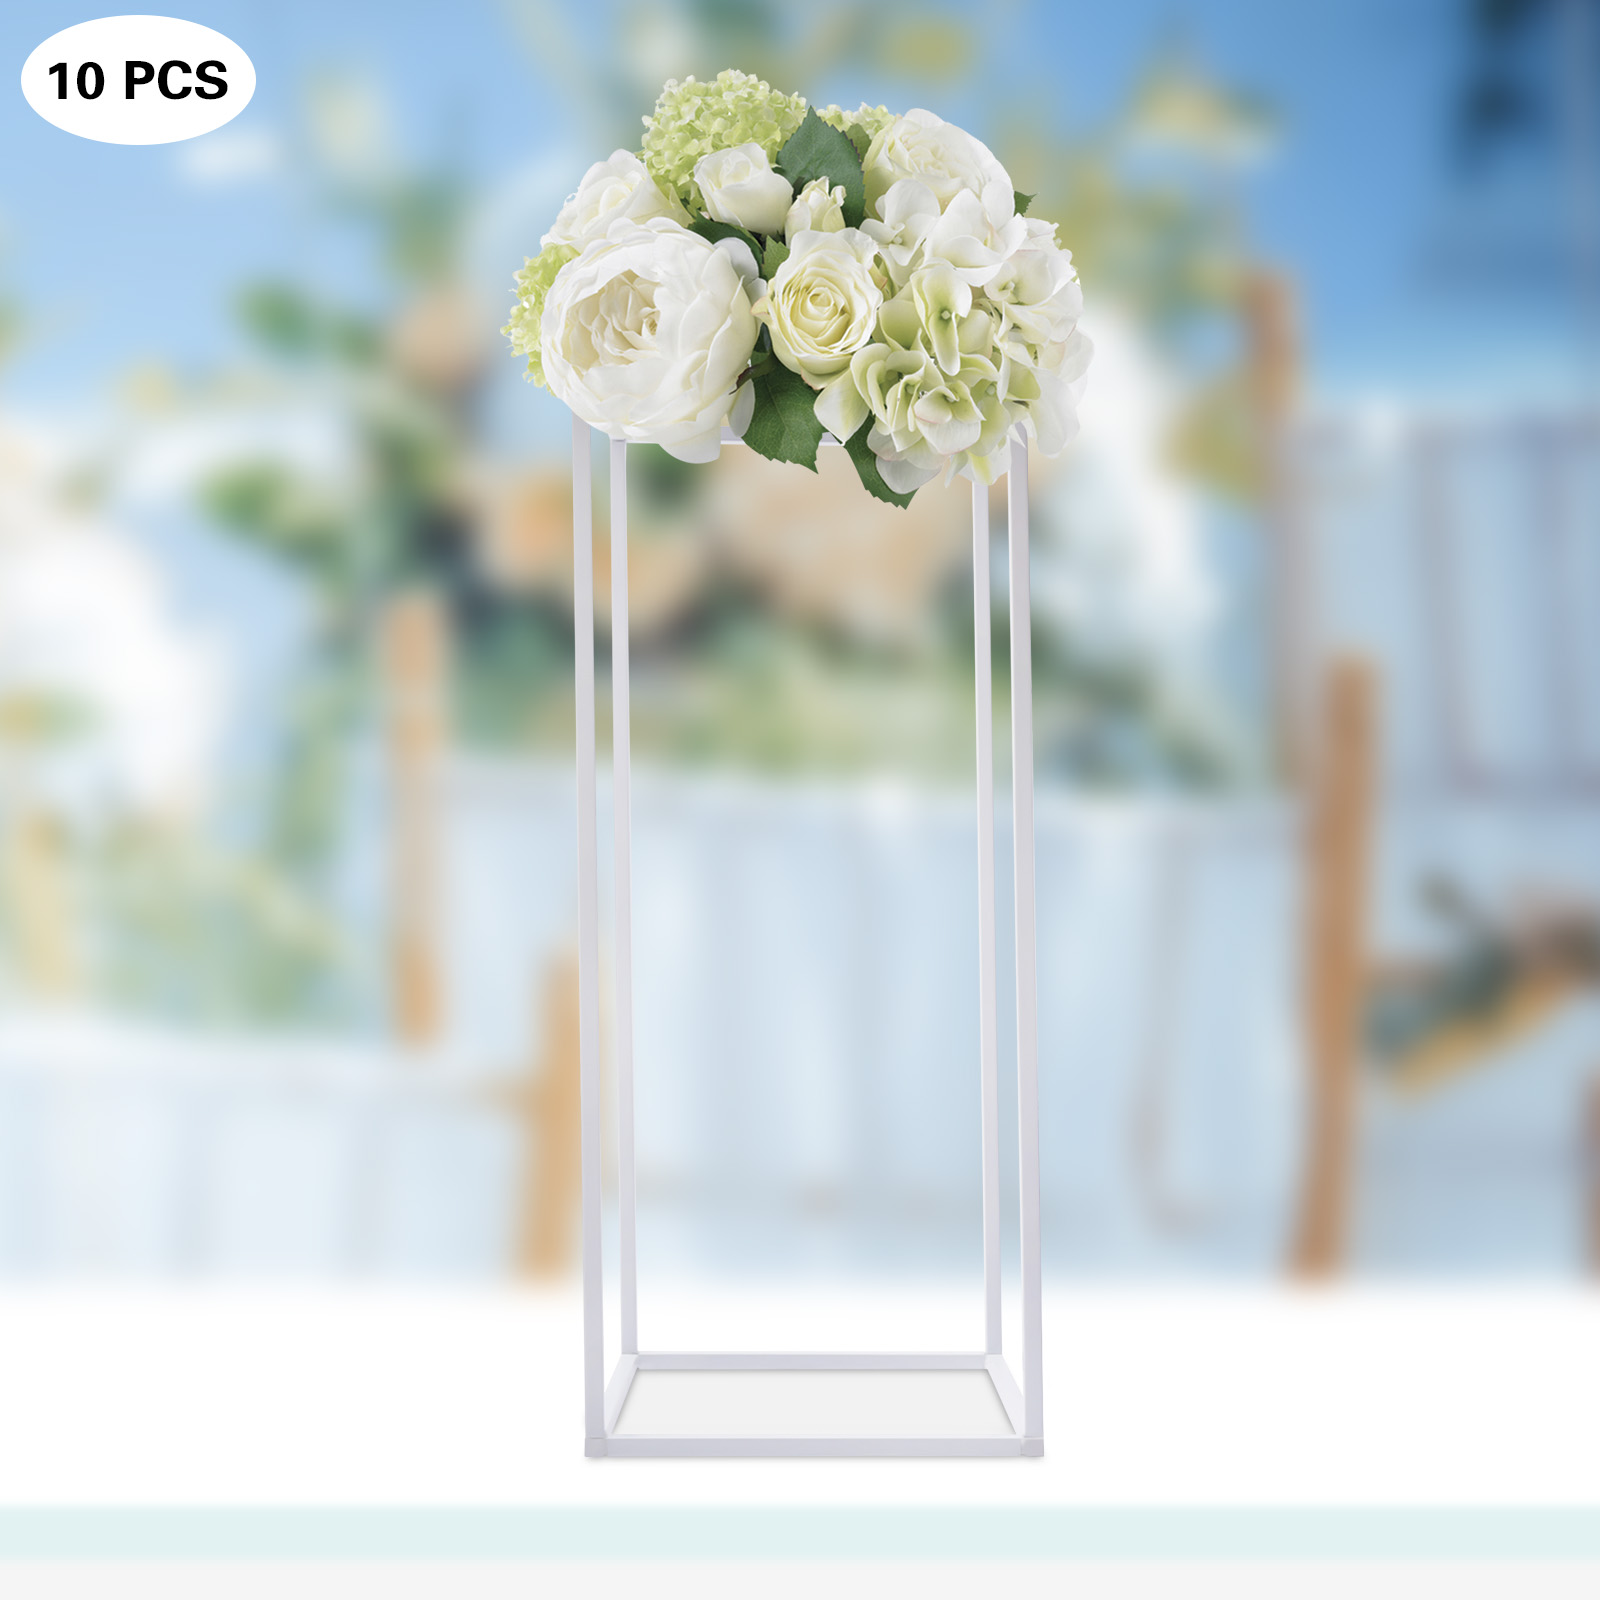 60cm Geometric Rectangle Metal Stands Flower Floor Rack Plant Display Holders White for Wedding Party Centerpieces Decor